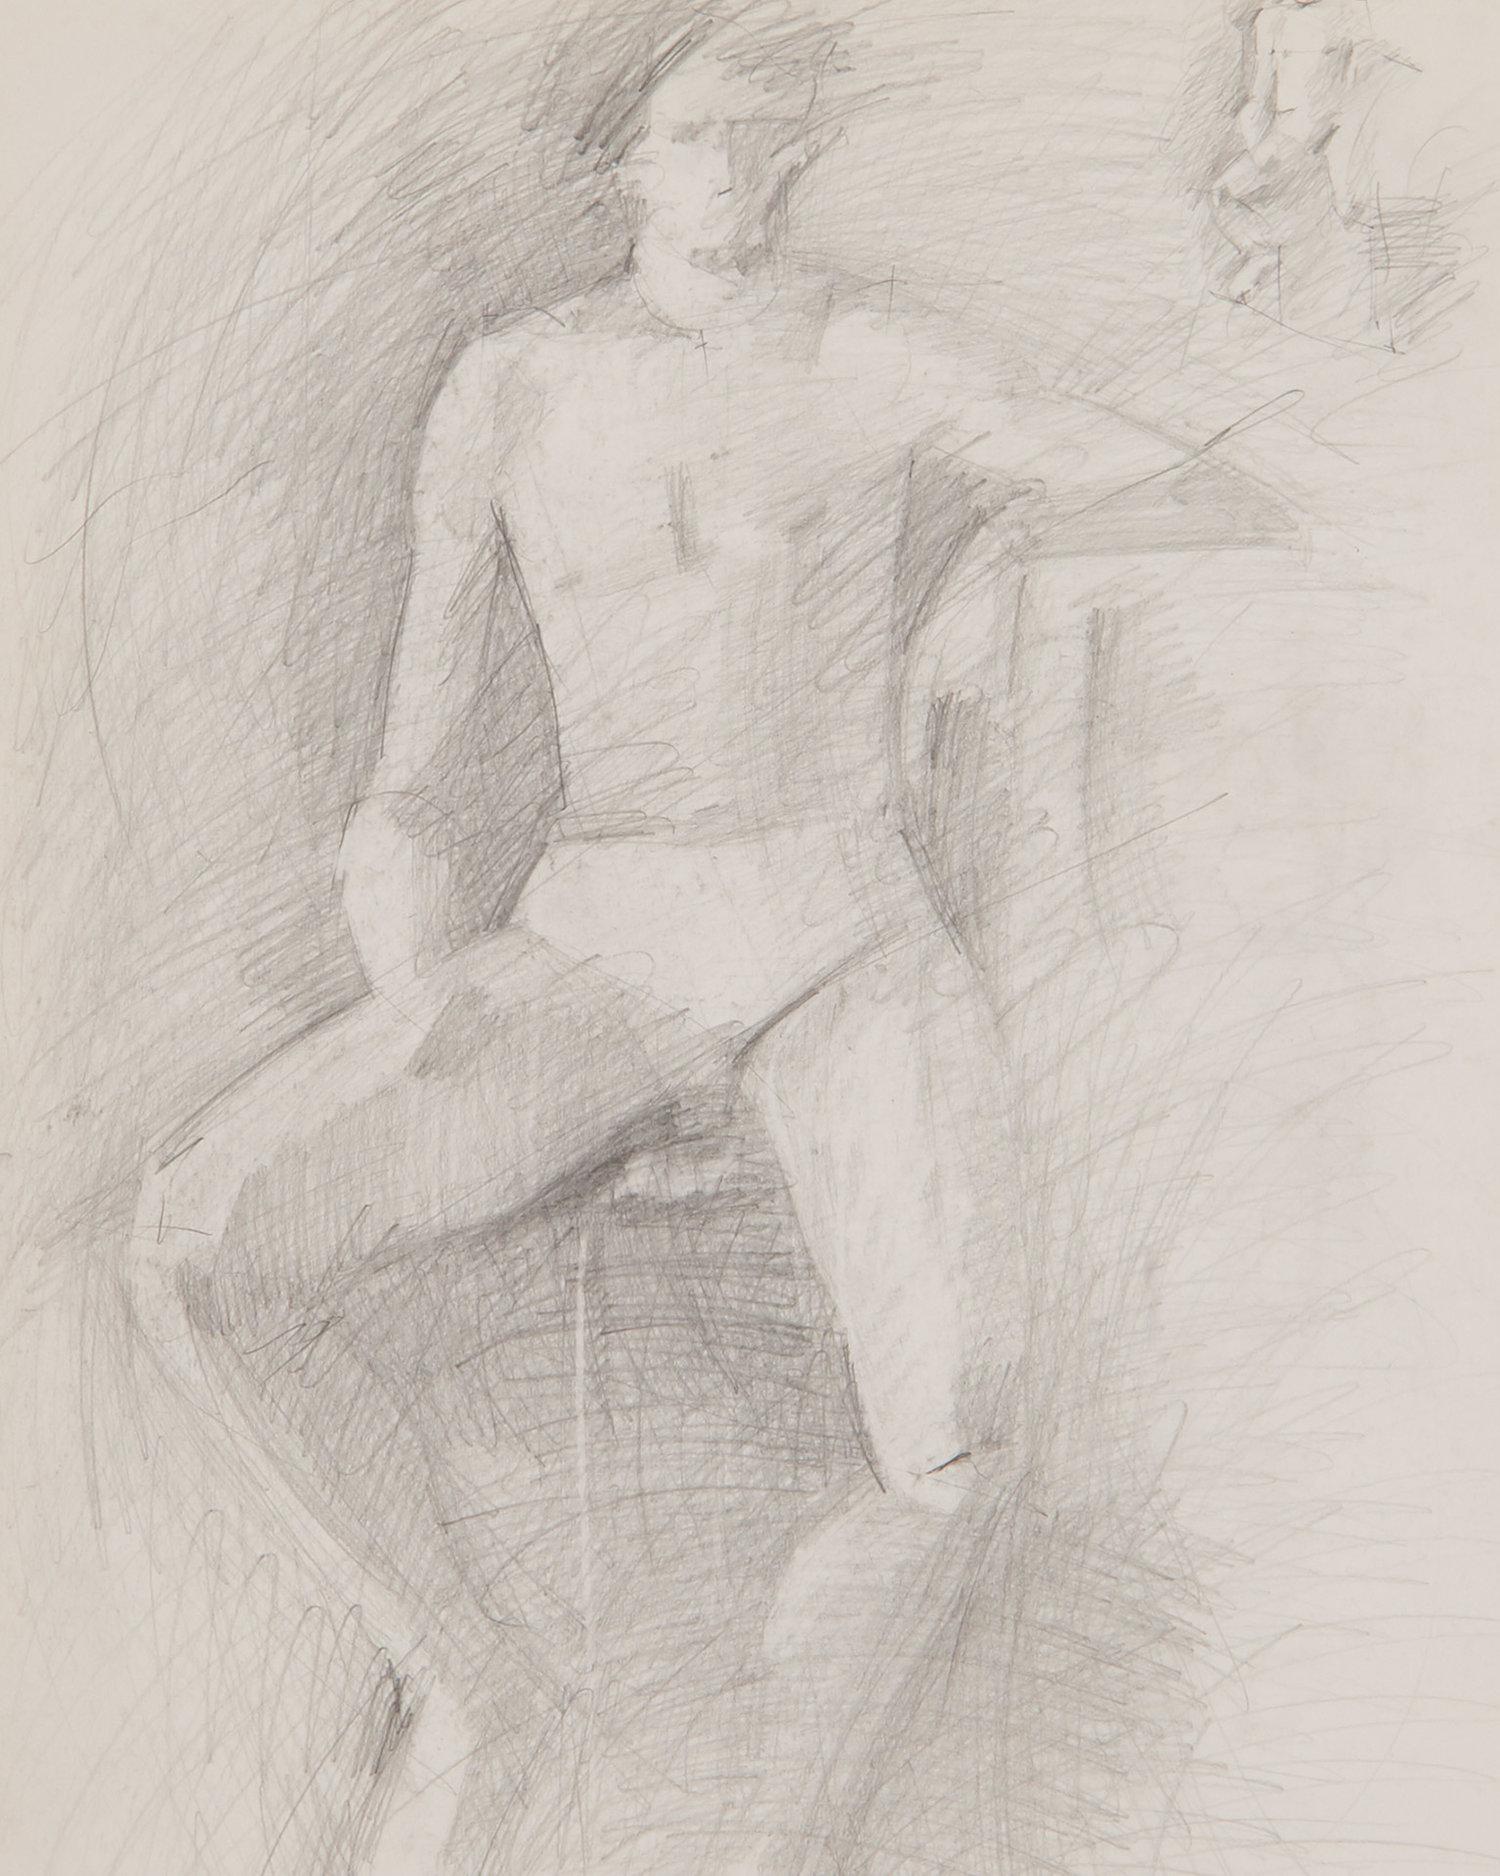 While in Athens, Greece we came across an artist portfolio bursting at the seams with thoughtful pencil sketches. We imagine this artist spent much time in the museums of Athens, perfecting his techniques. This is one in a series of 10. 

We’ve